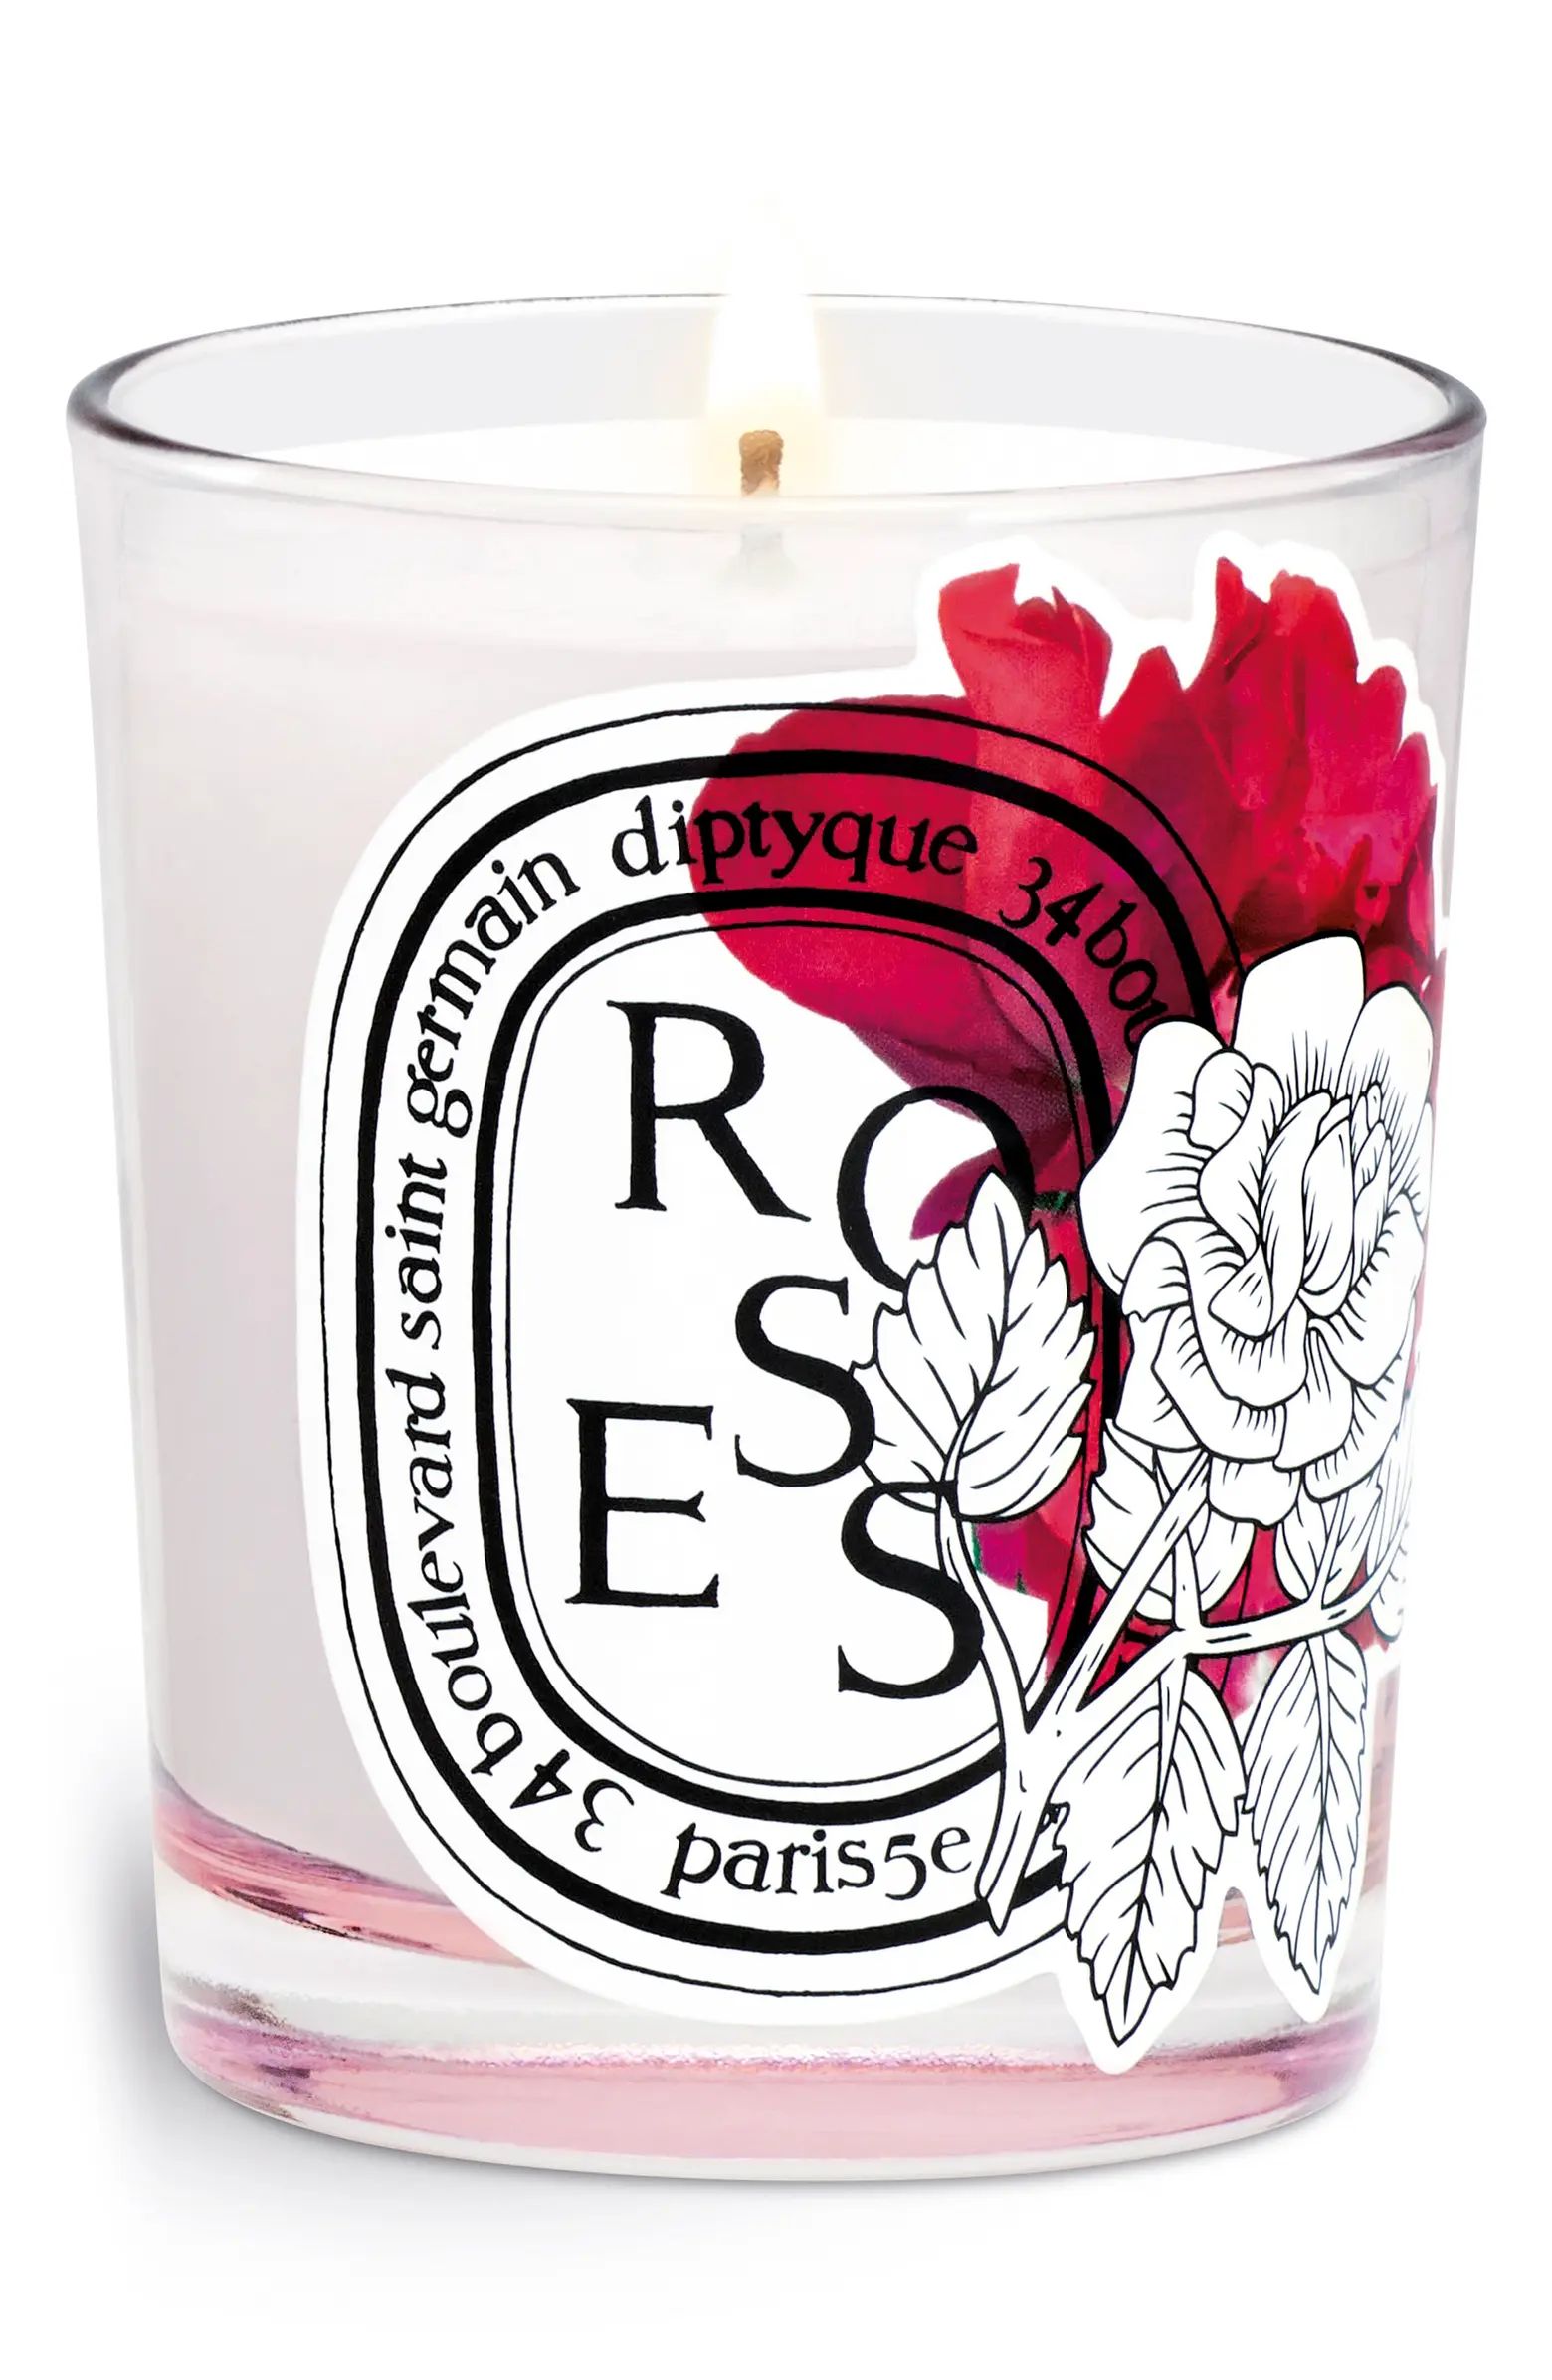 Roses CandleDIPTYQUE | Nordstrom